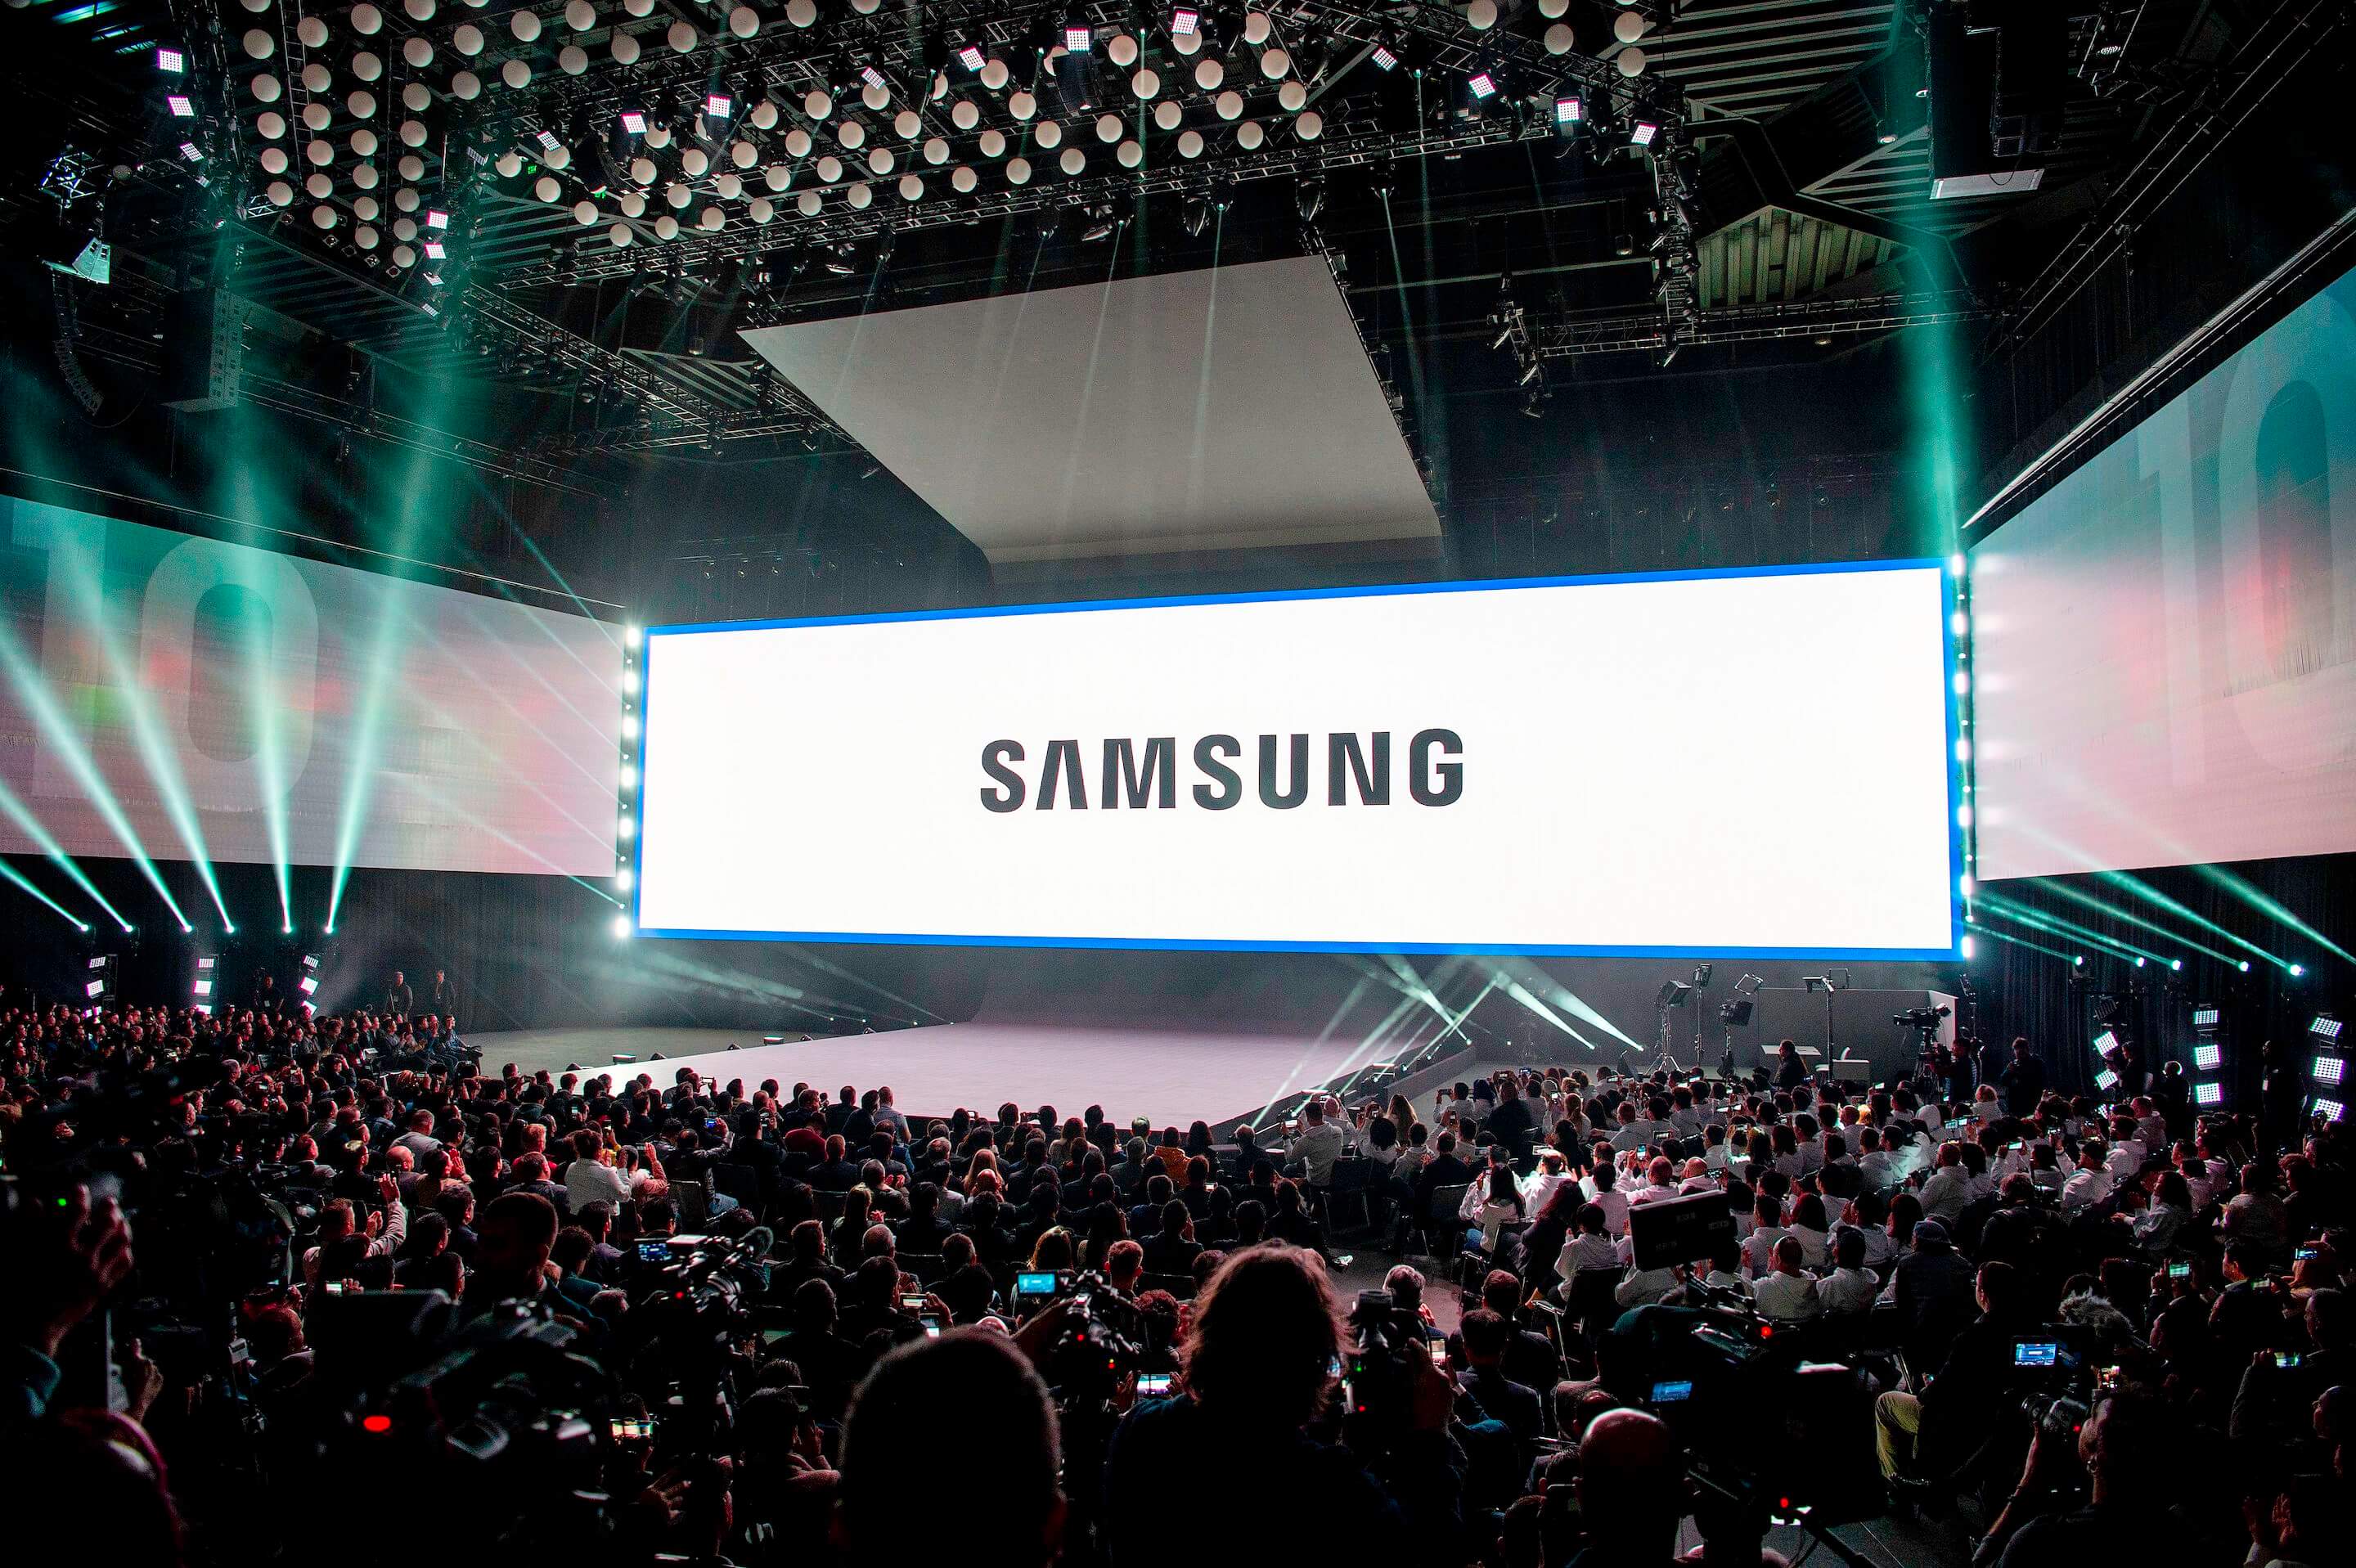 Samsung will reveal an AirDrop-style file-sharing service alongside the Galaxy S20